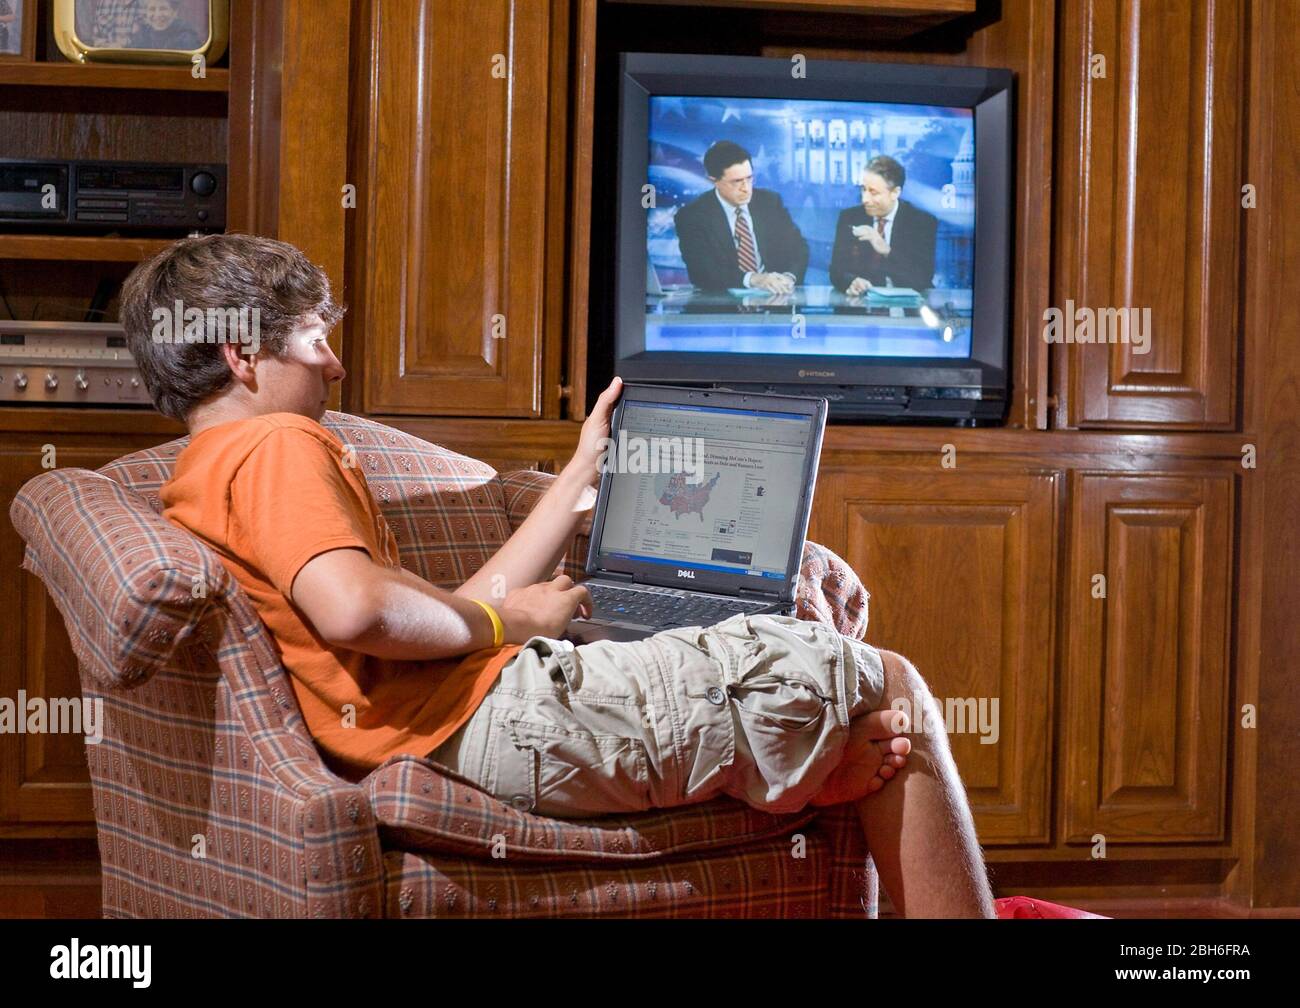 Austin, Texas USA, November 4, 2008: High School student (14) monitors election results on election night on the Internet and television with Stephen Colbert (l) and Jon Stewart (r) during the historic win for Barack Obama as President of the United States.   ©Bob Daemmrich Stock Photo